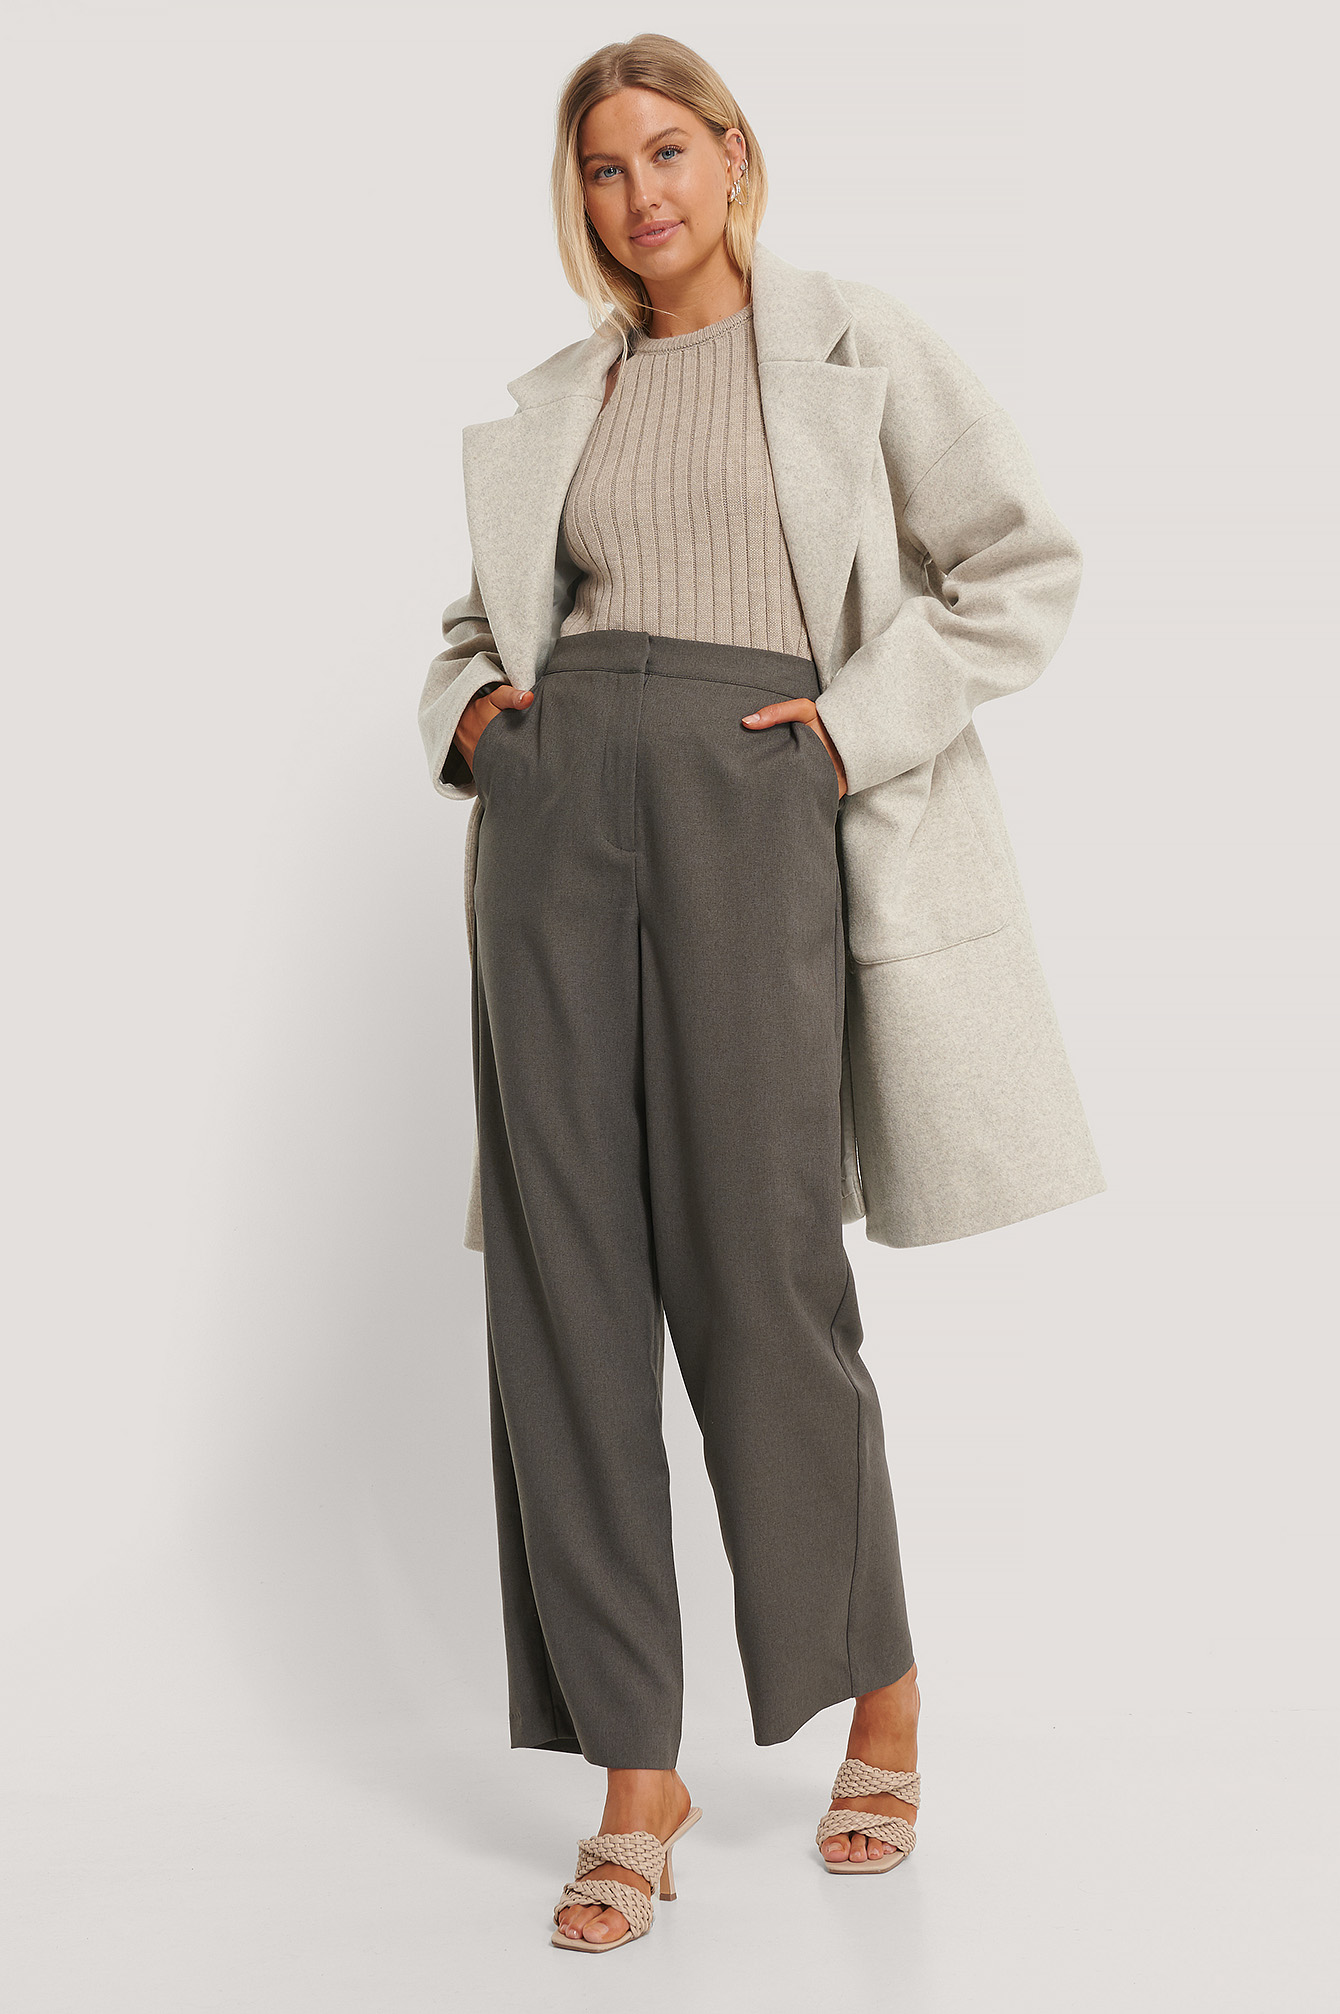 Wool Blend Dropped Shoulder Coat with Grey Suit Pants and Ribbed High Neck Knitted Sweater.